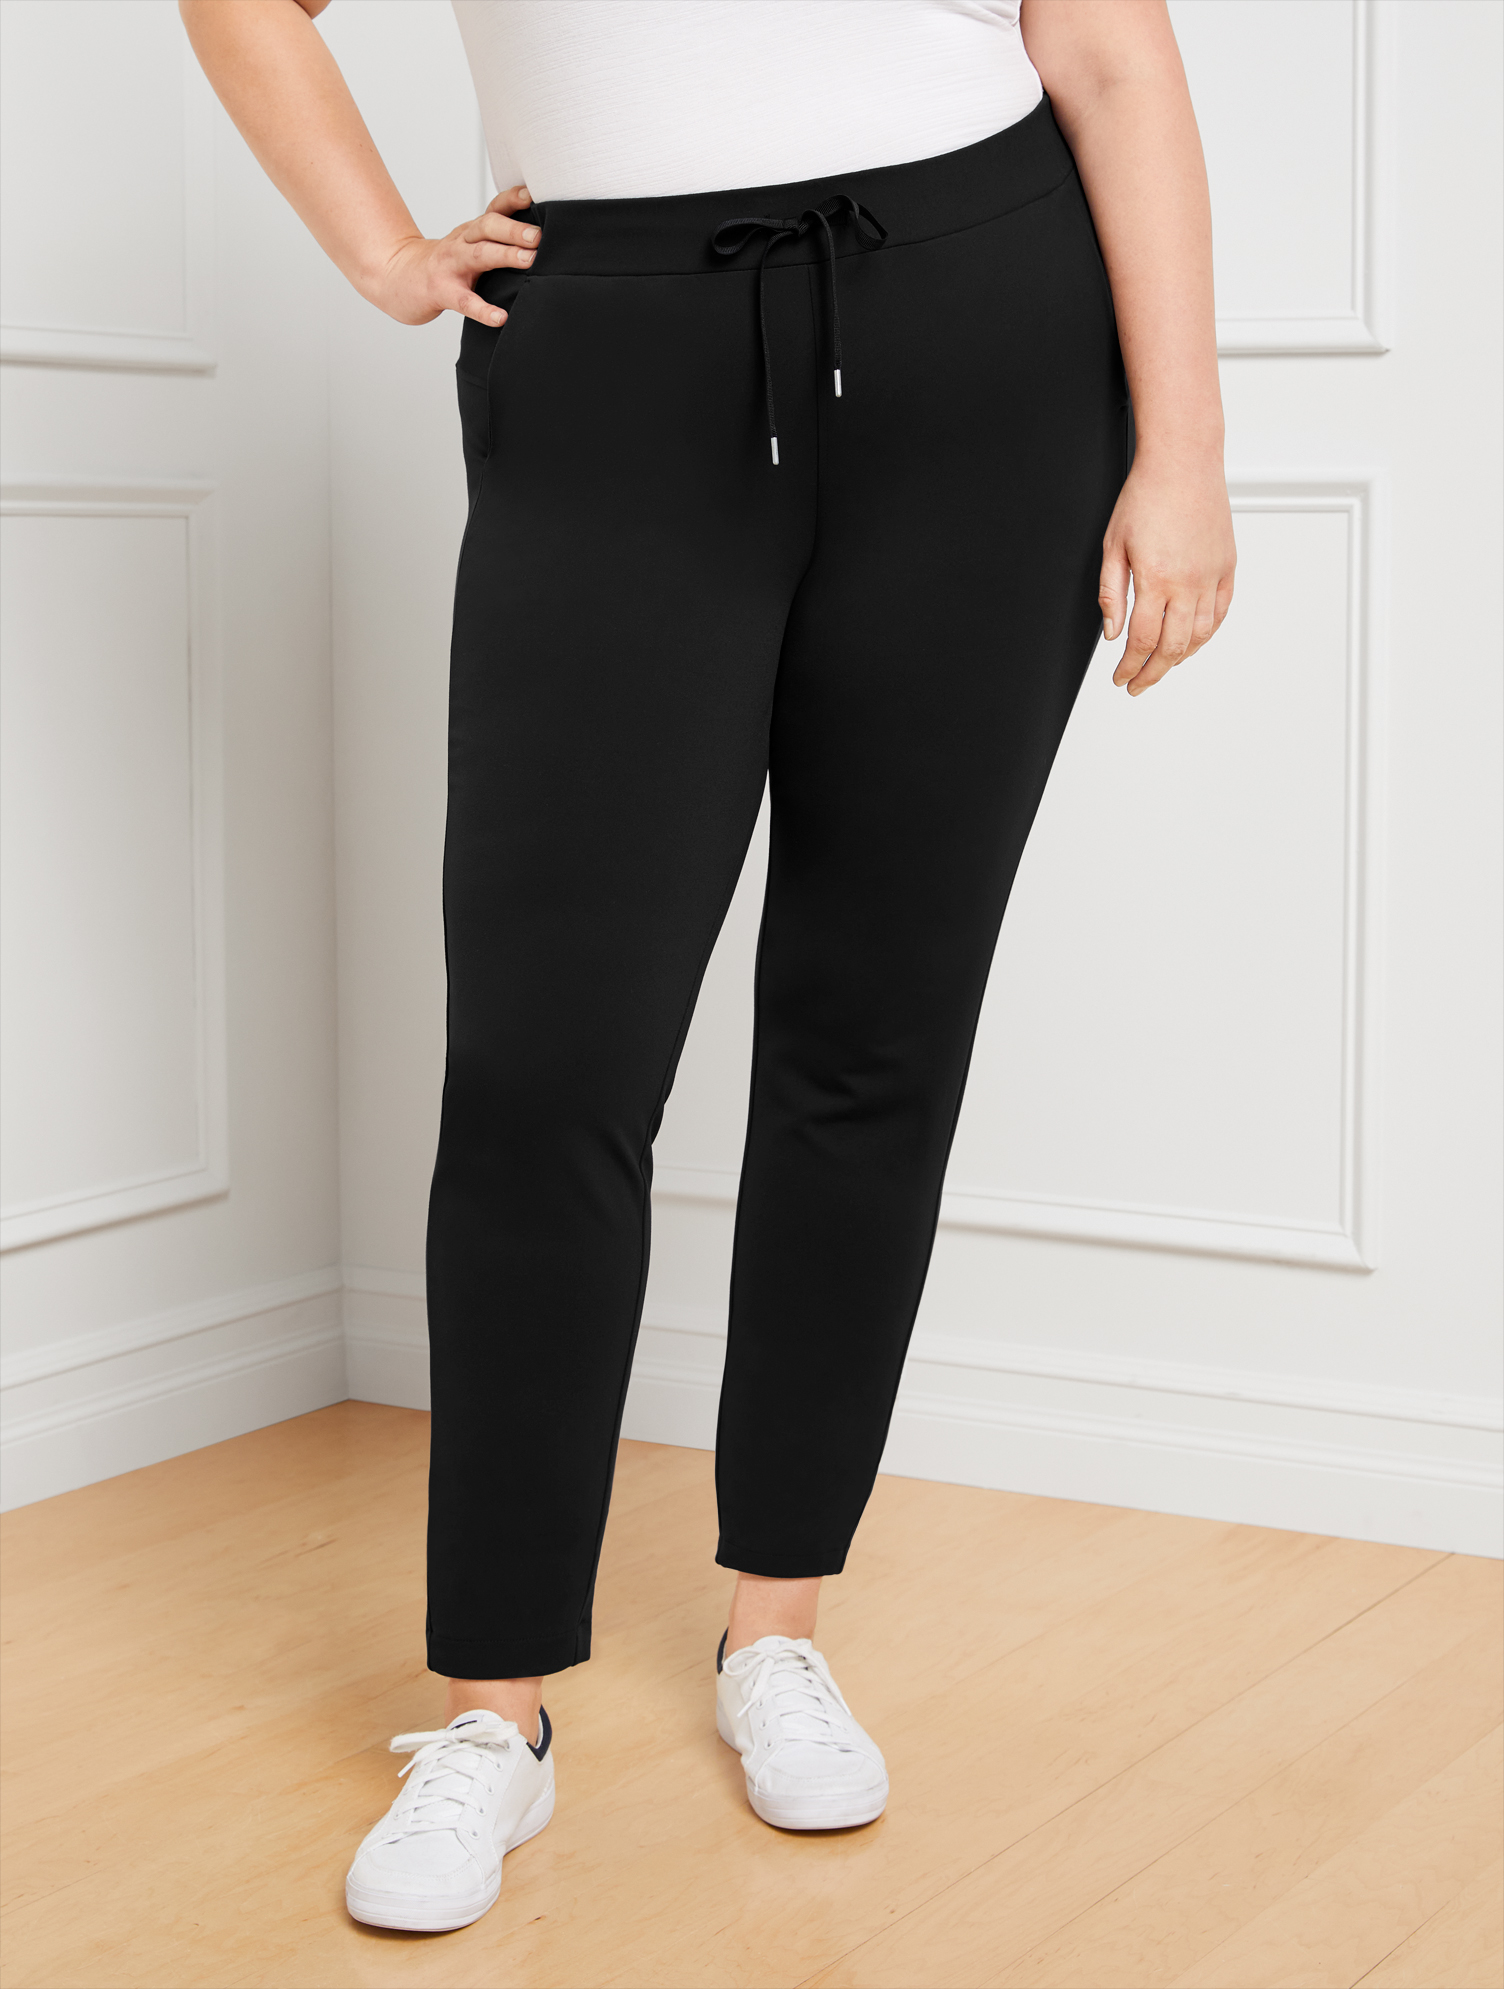 Talbots Out & About Stretch Jogger Pants - Black - 2x